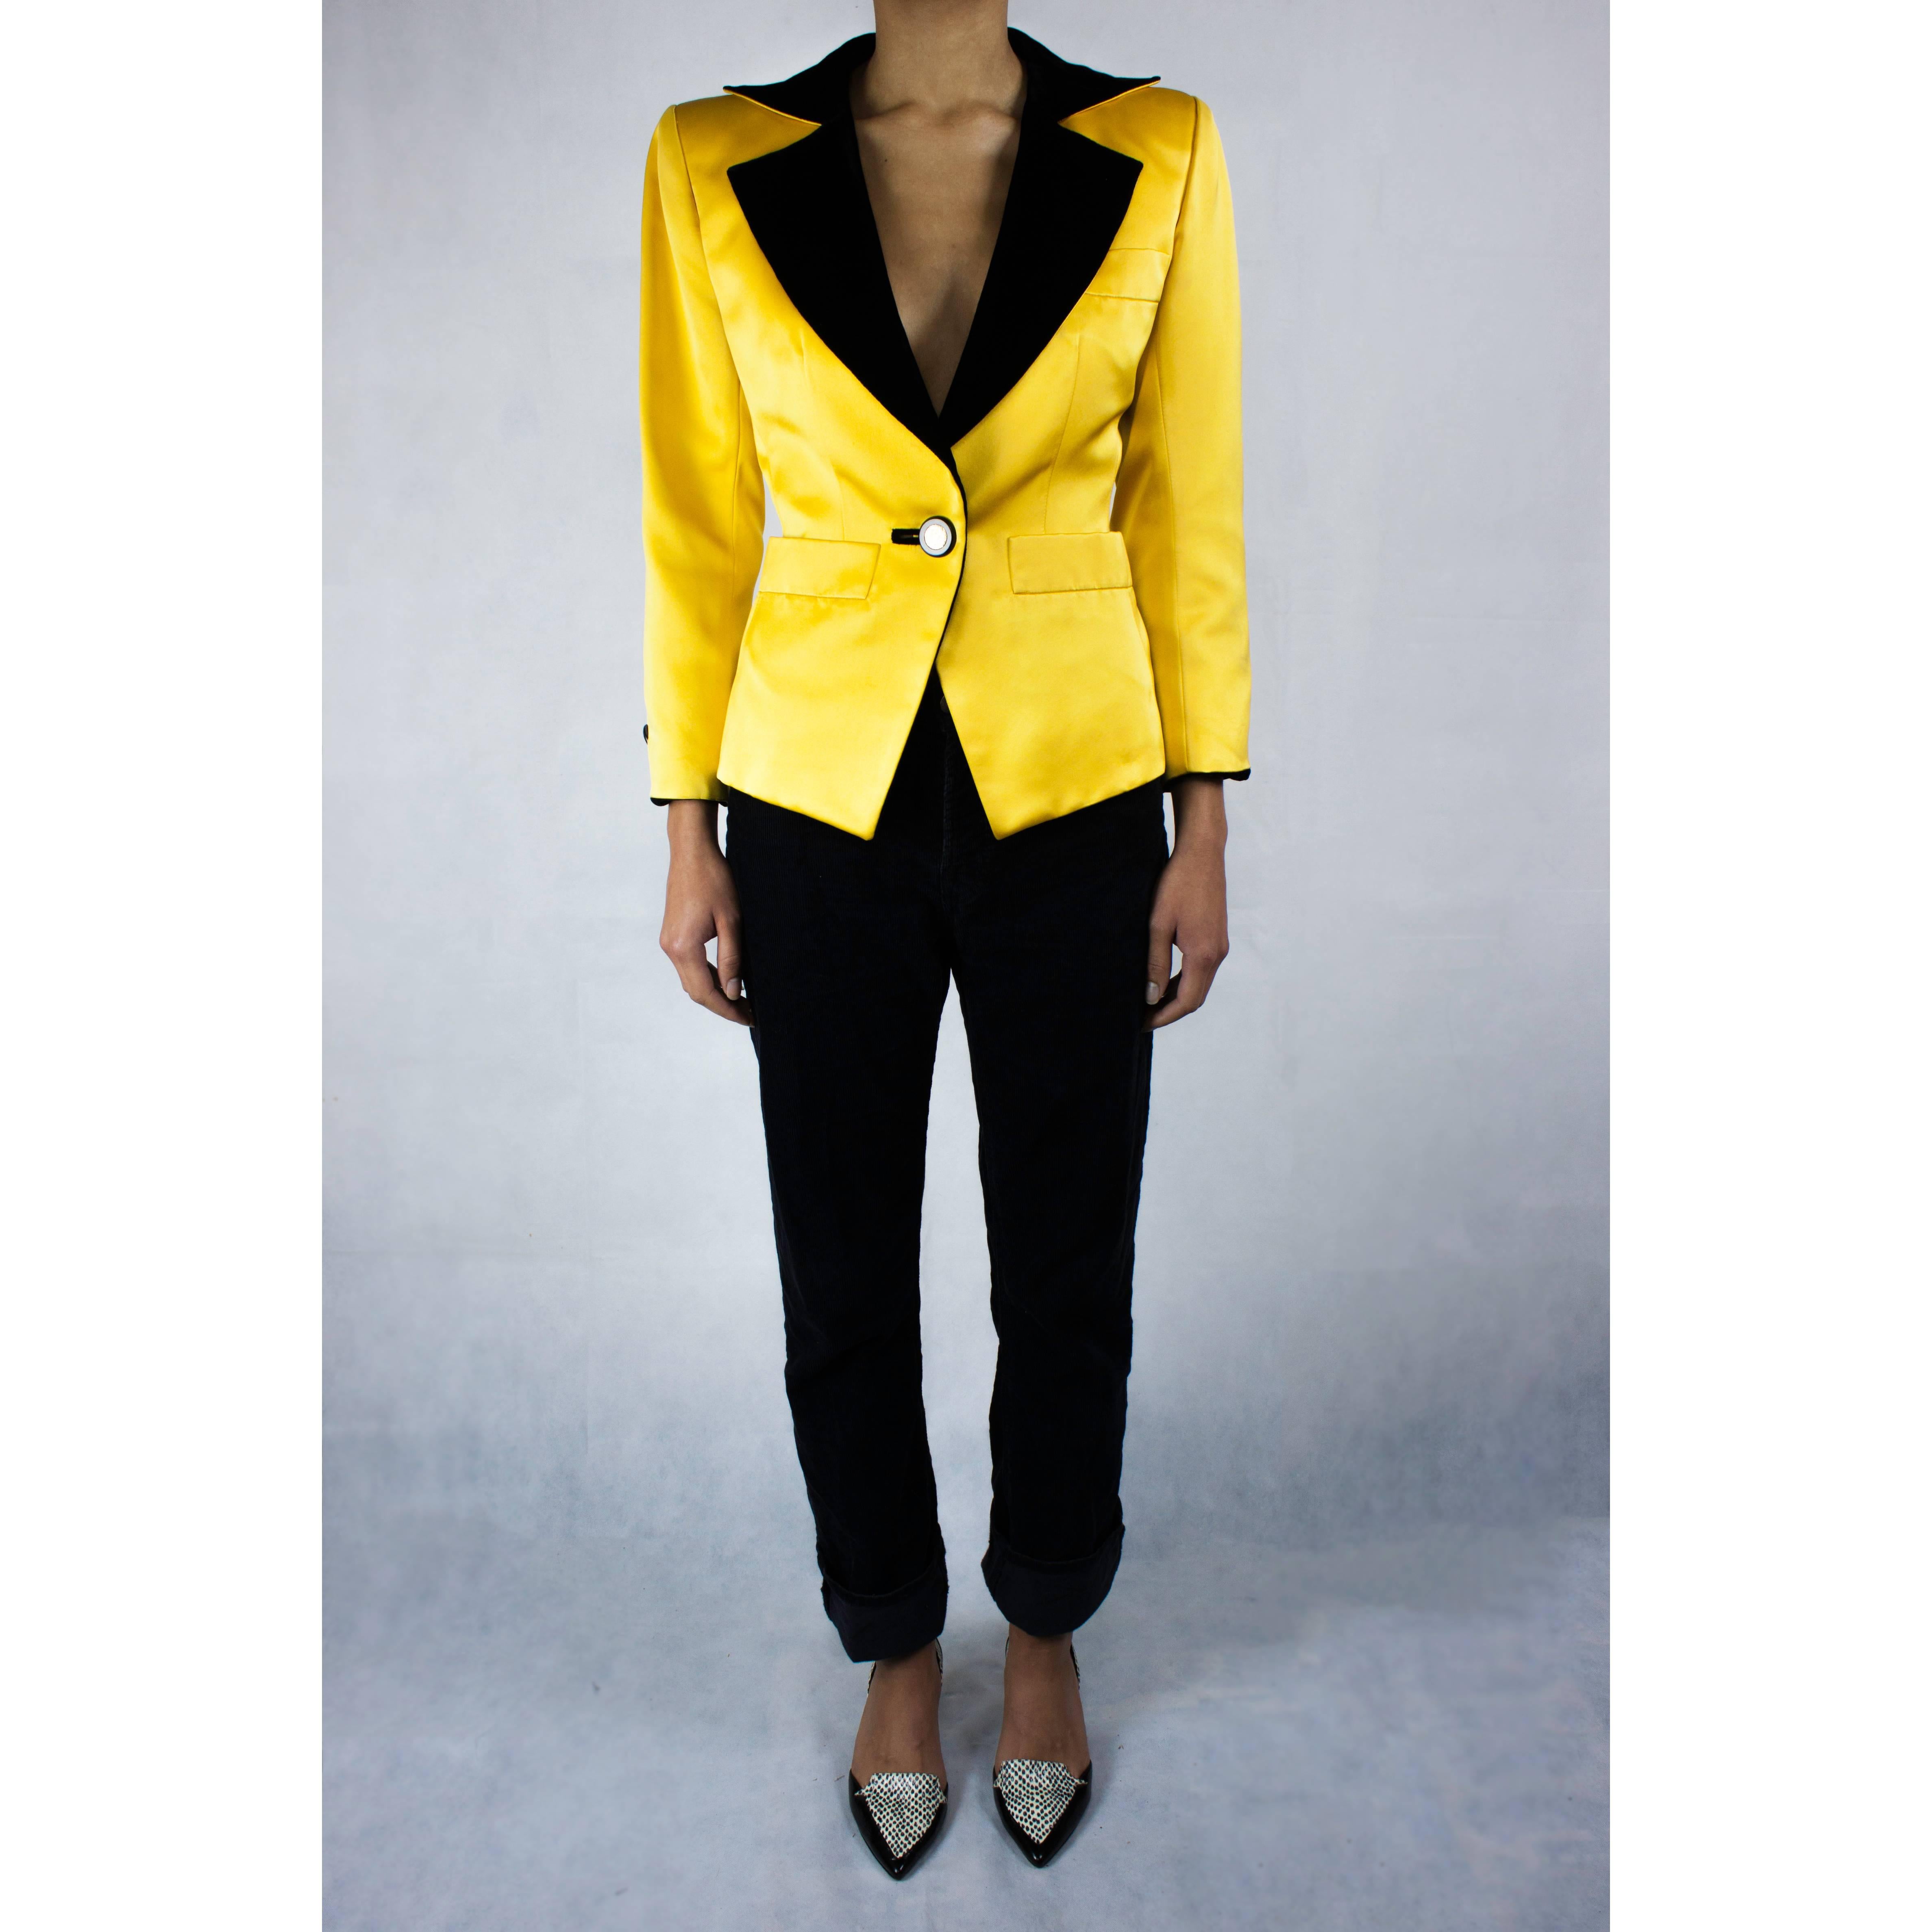 

Yves Saint Laurent explored this great classic among his iconic innovations from 1966 to 2002.

The tuxedo jacket, usually worn in combination with trousers as a suit, figures in the history of fashion among the invention that revolutionised the